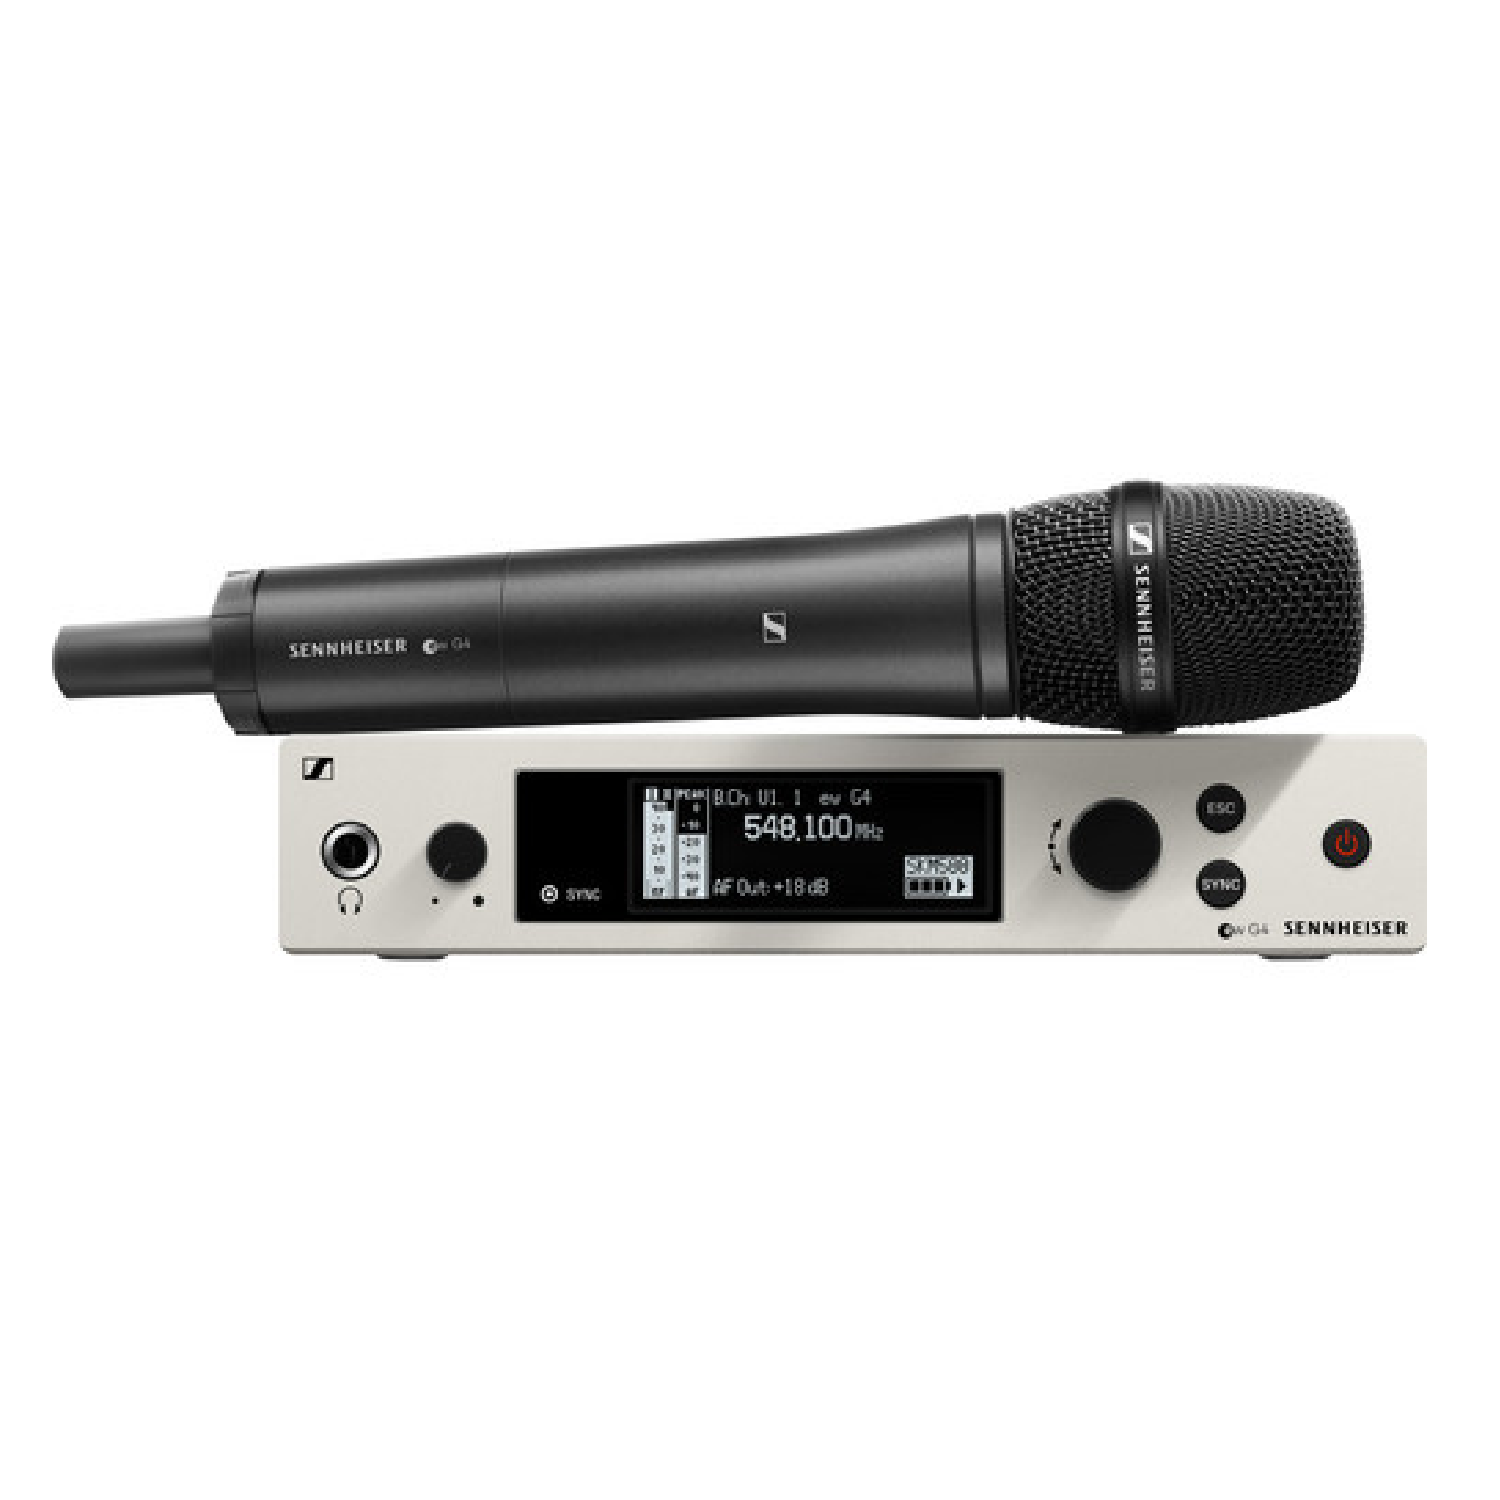 Wireless Handheld Microphone System with MMD 935 Capsule - Cw: 718 - 790 MHz   EW 500 G4 935 Cw sennheiser